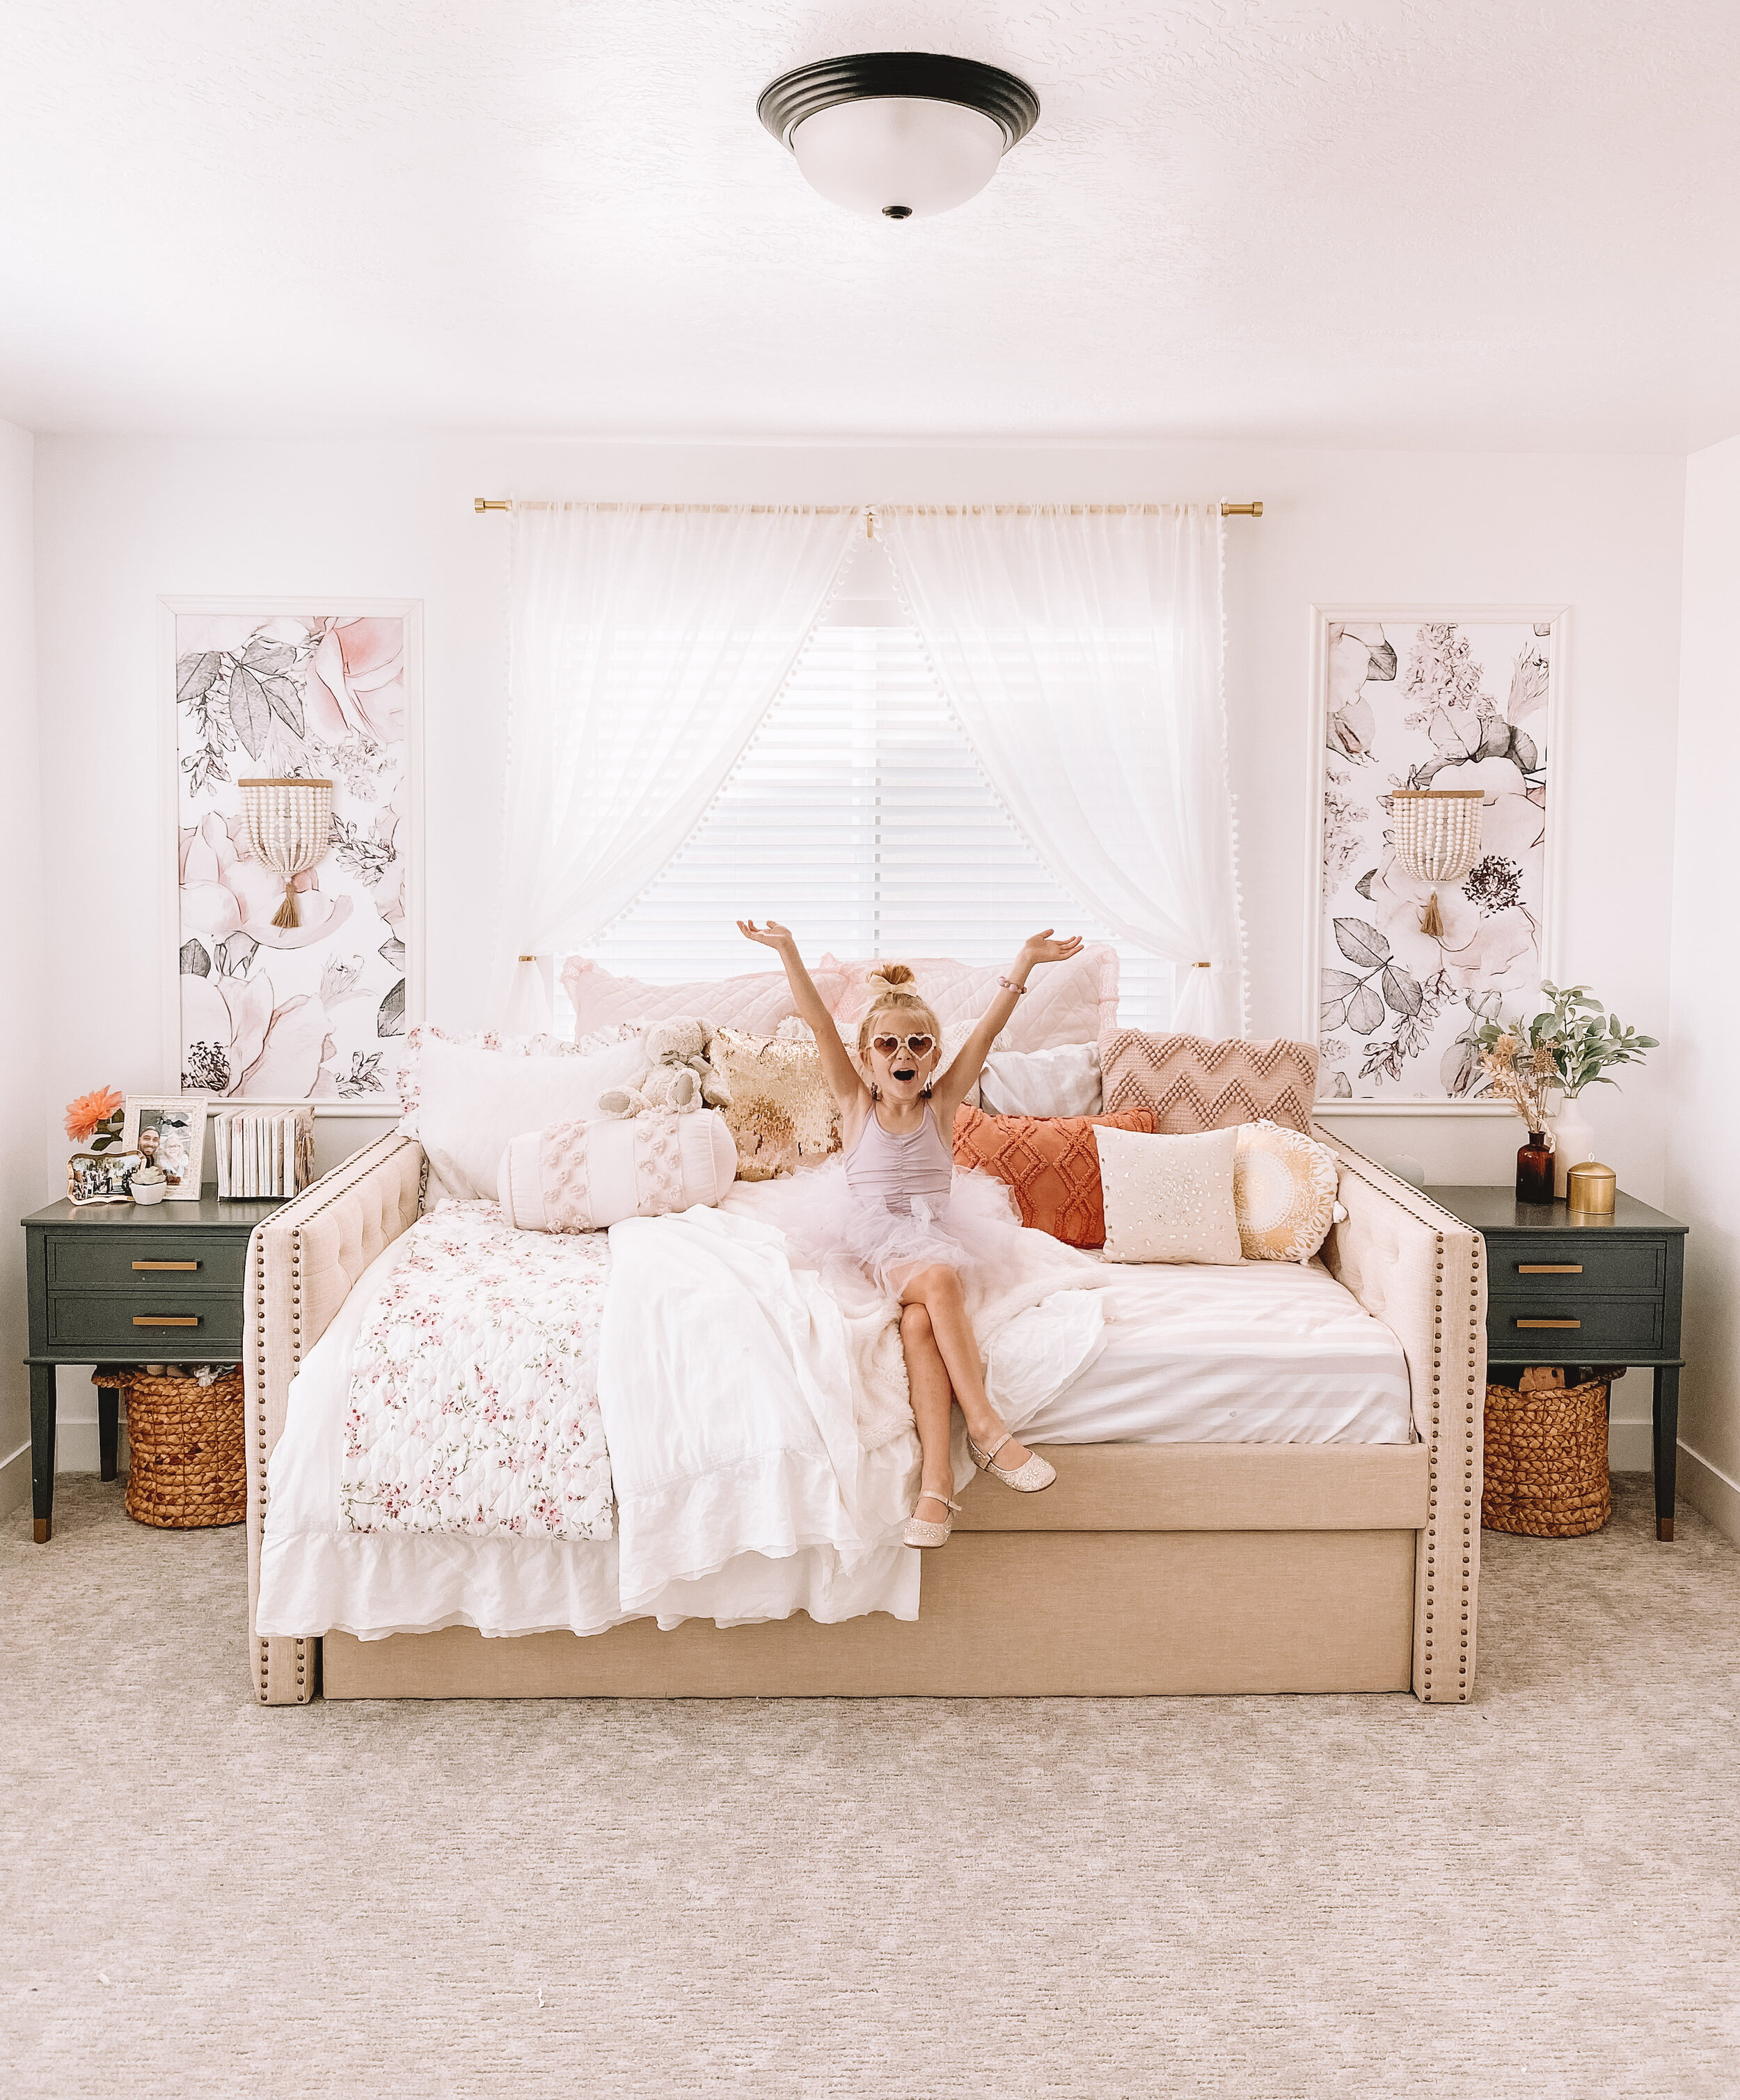 Cute Girly Princess Room Inspo - The Overwhelmed Mommy